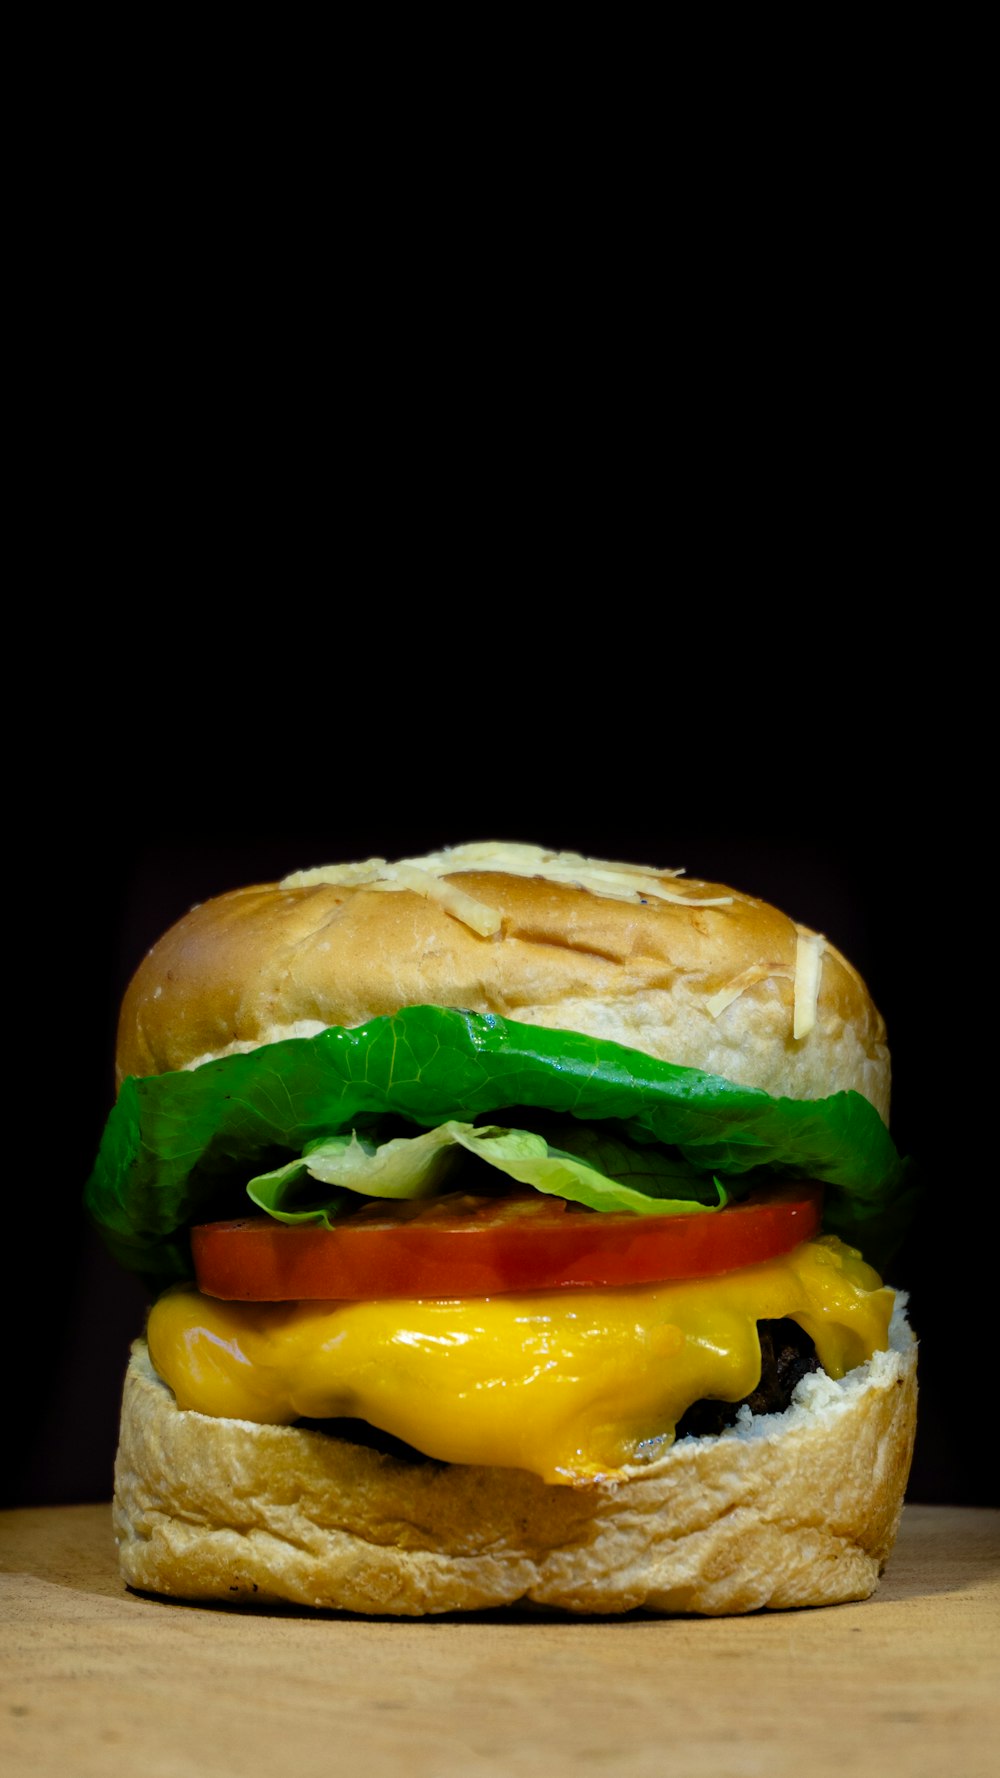 a cheeseburger with lettuce, tomato, and cheese